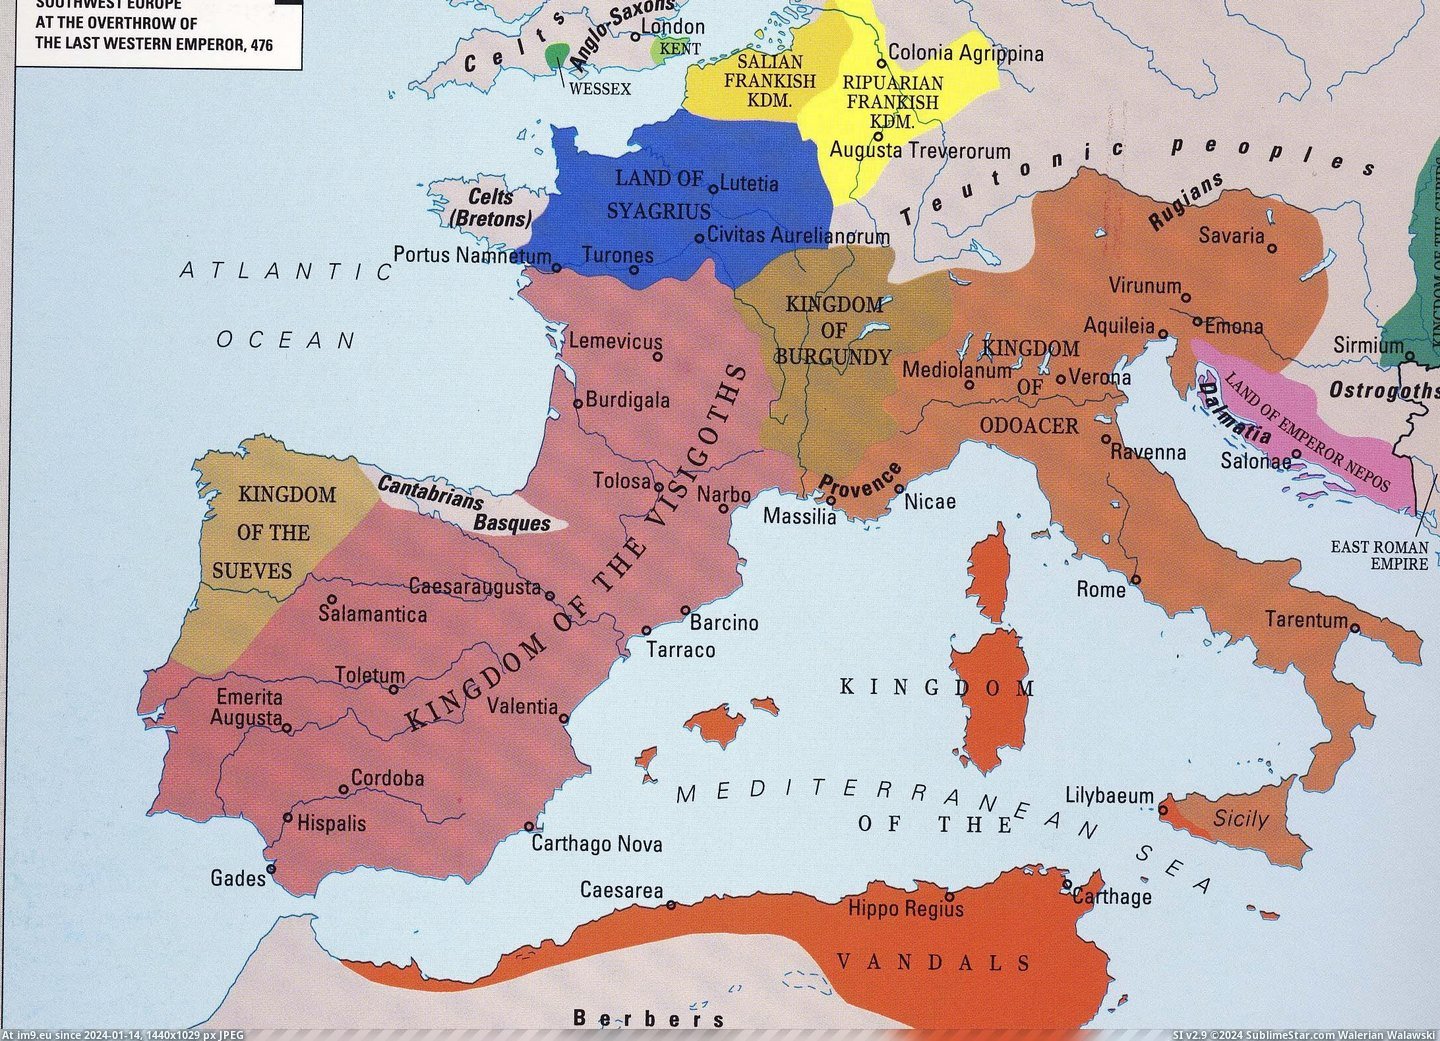 #Europe #Fall #Roman #Western #Empire [Mapporn] Western Europe After The Fall Of The Western Roman Empire In AD 476 [2184x1572] Pic. (Image of album My r/MAPS favs))